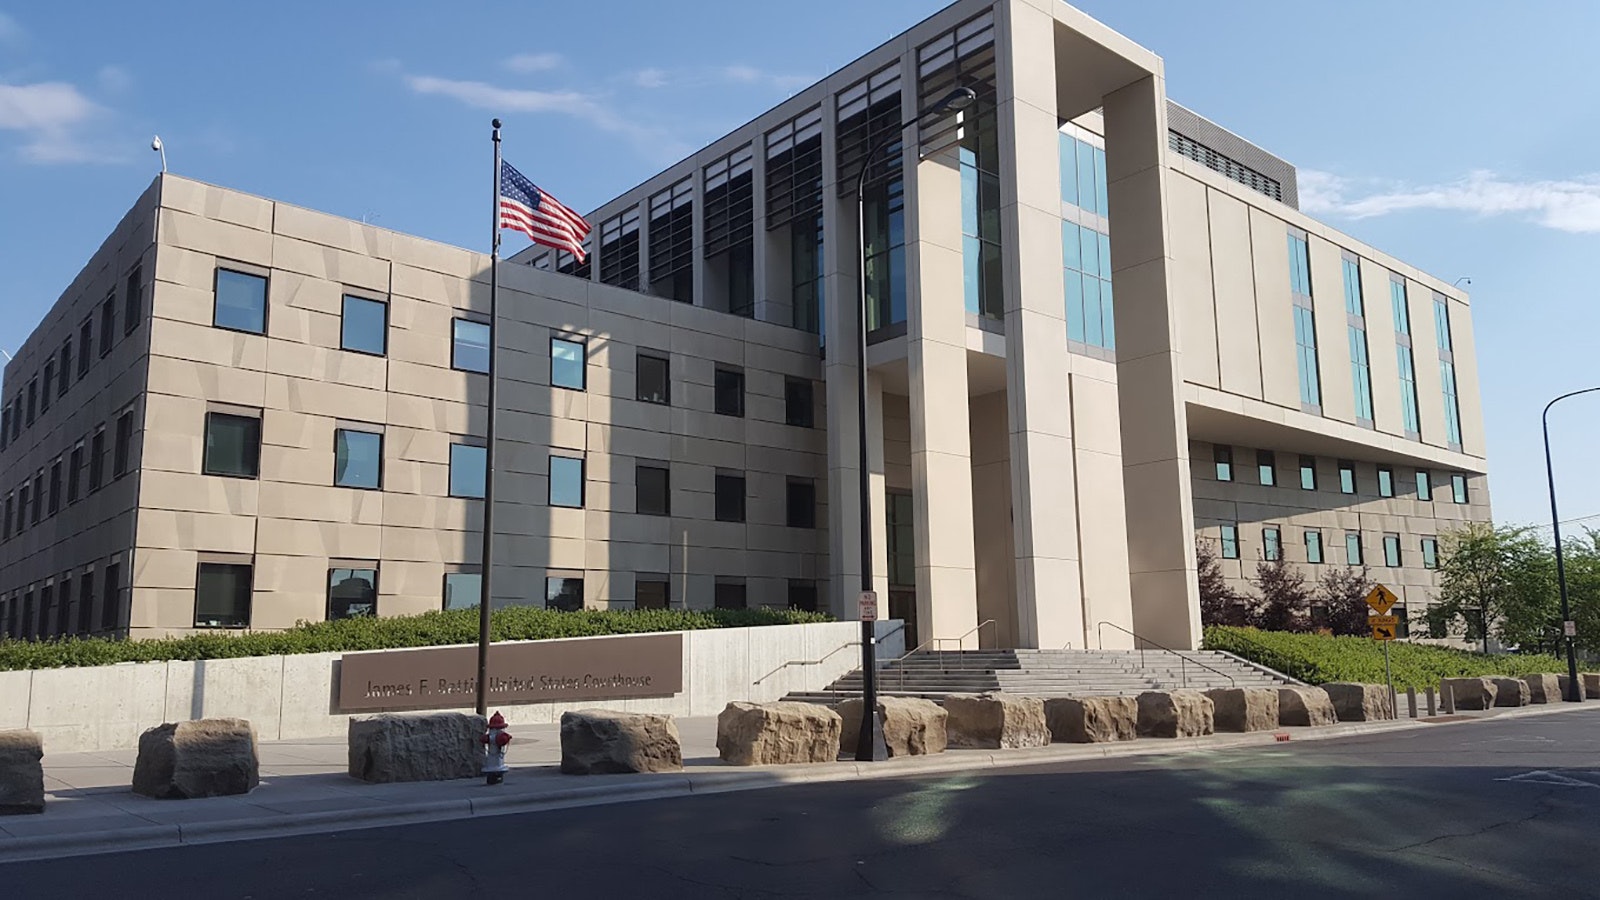 The James F. Battin Federal Courthouse in Billings, Montana.